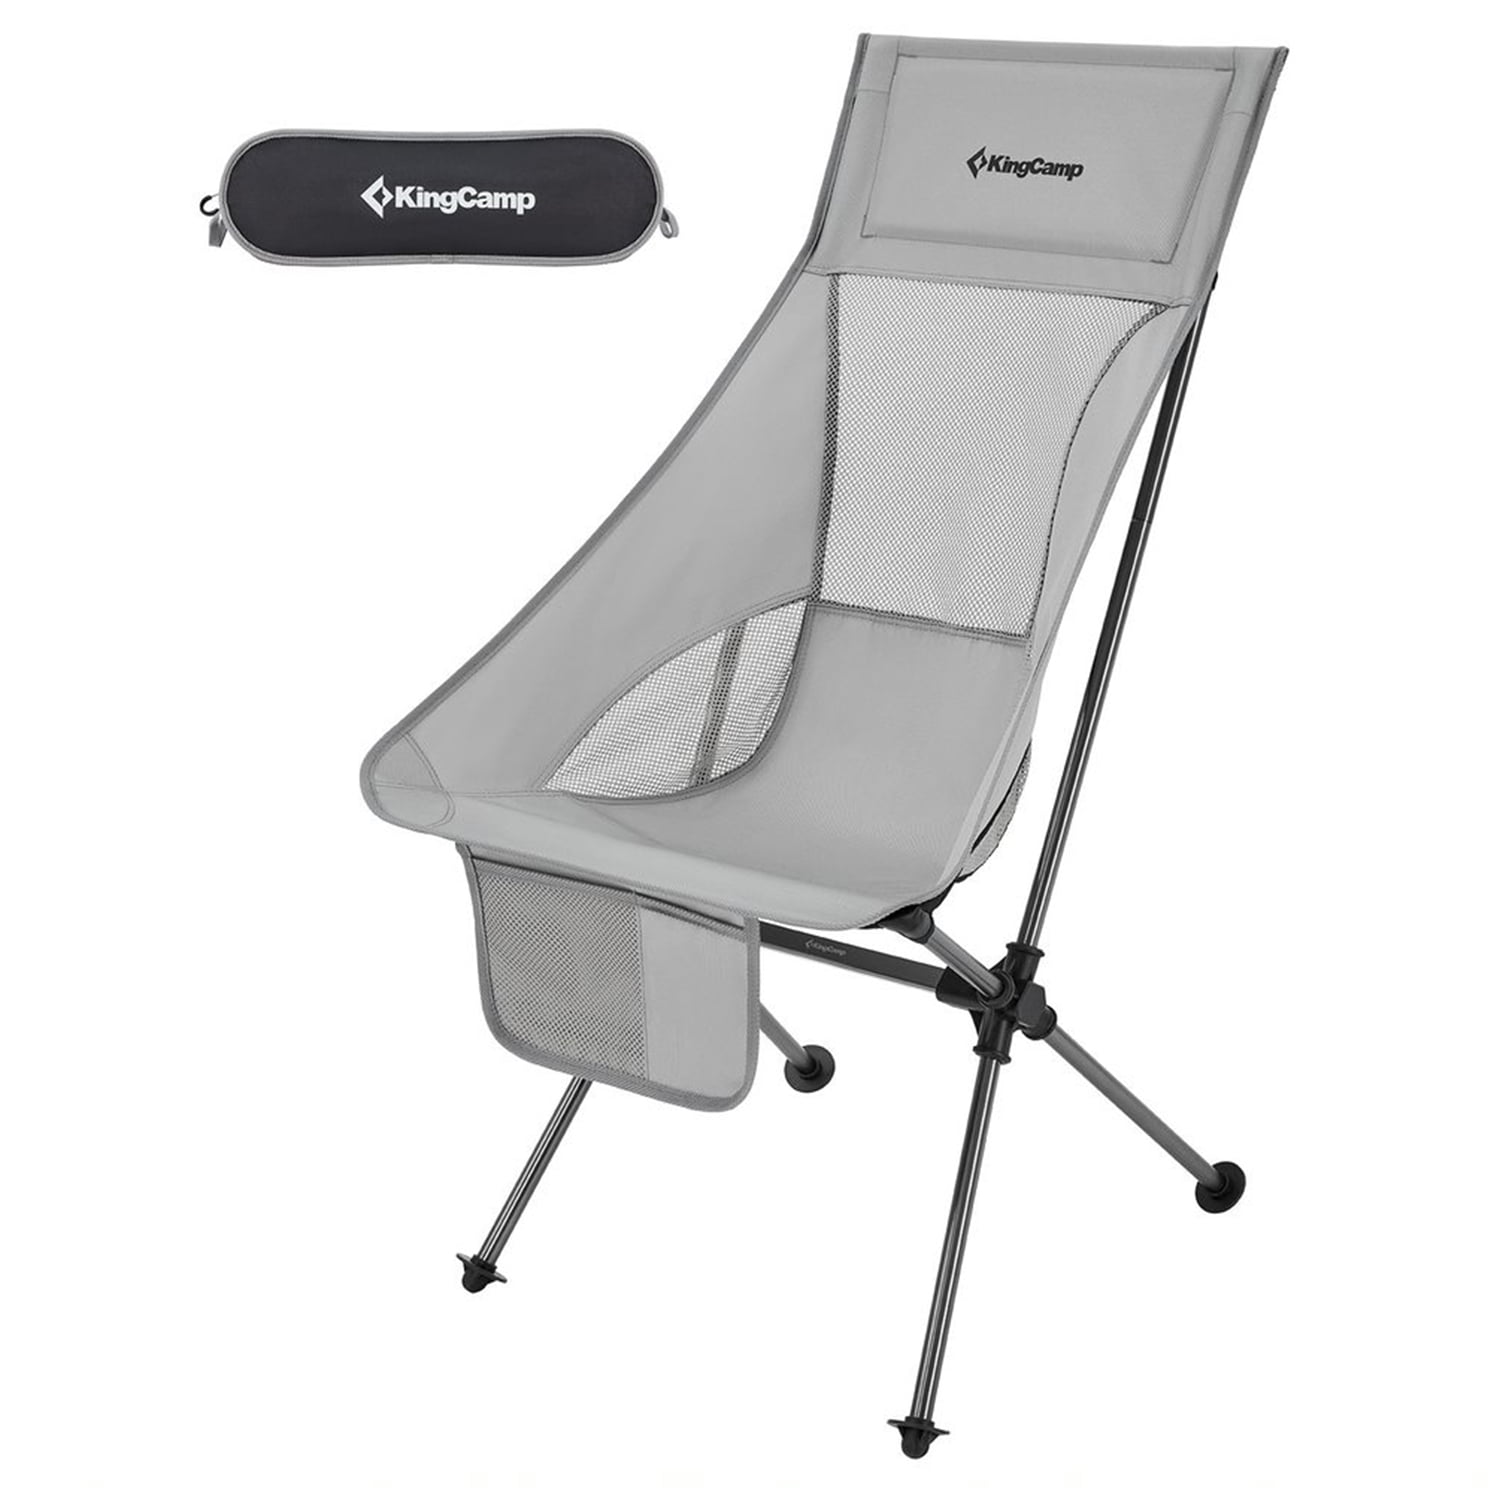 KingCamp Ultralight Compact High Back Camping Folding Chair with Headrest Support Up to 150 KG